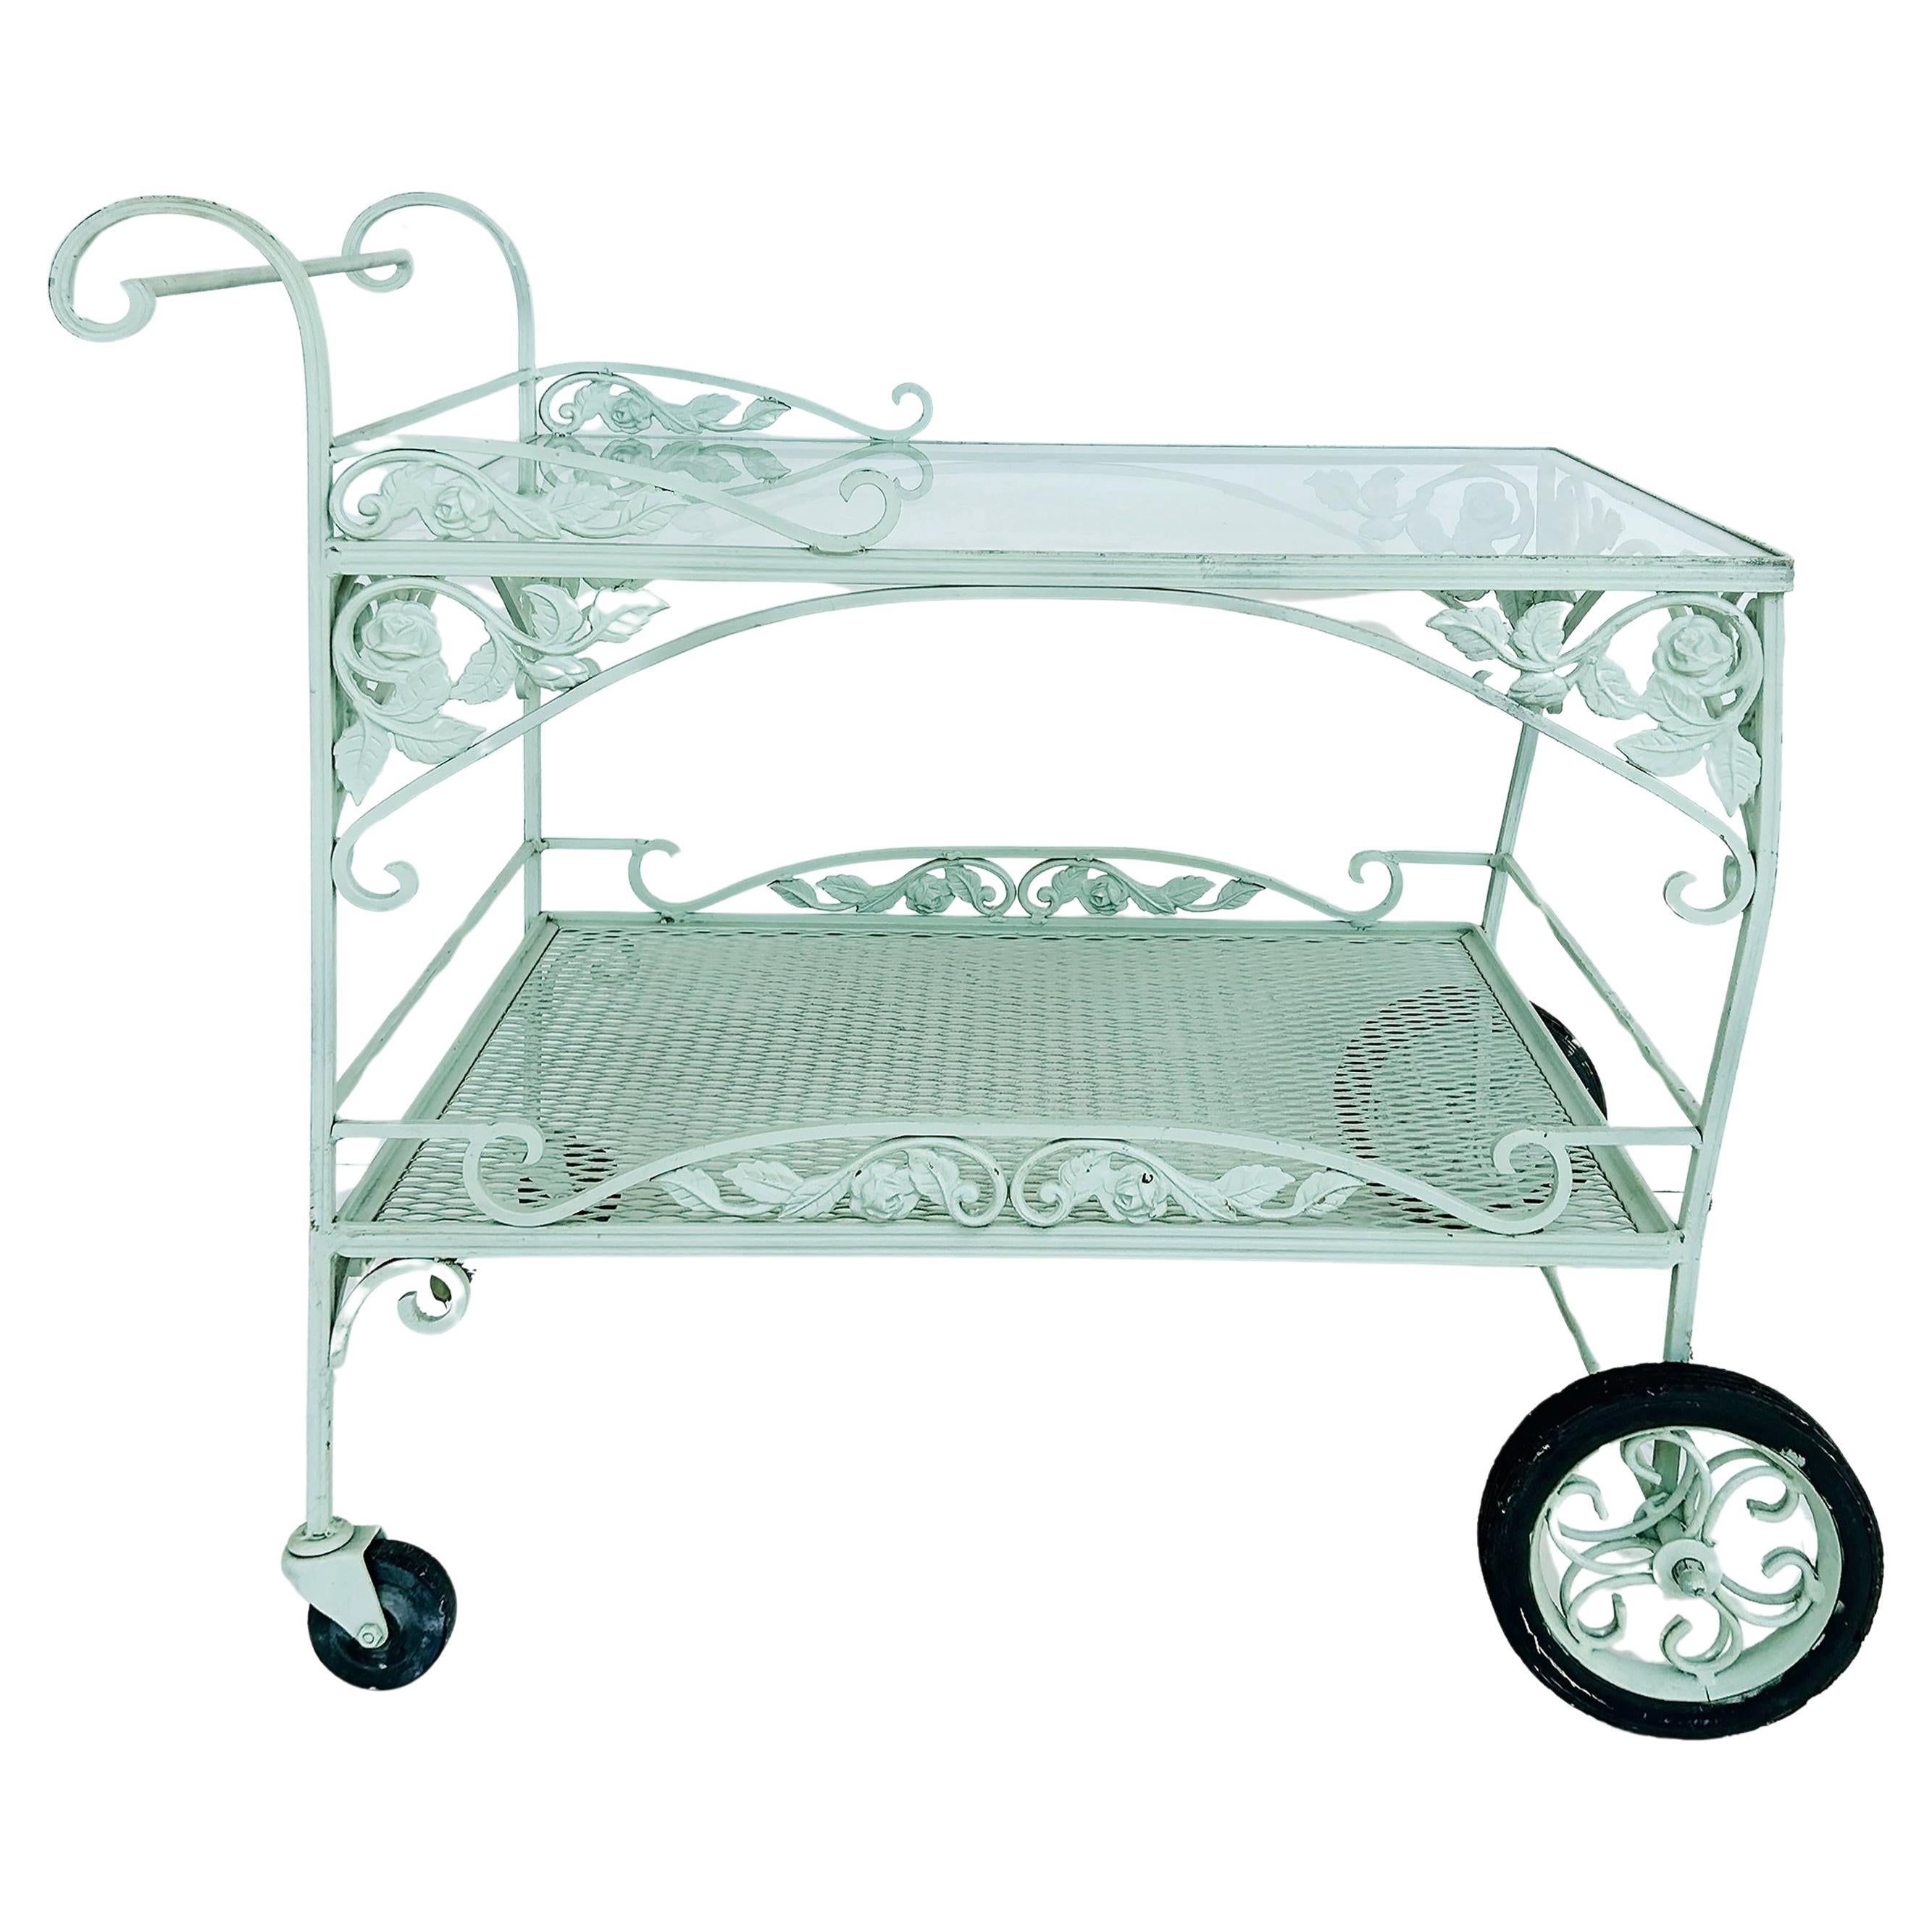 Russell Woodard Wrought Iron Patio/Serving/Bar/Tea Cart With Floral Decoration For Sale